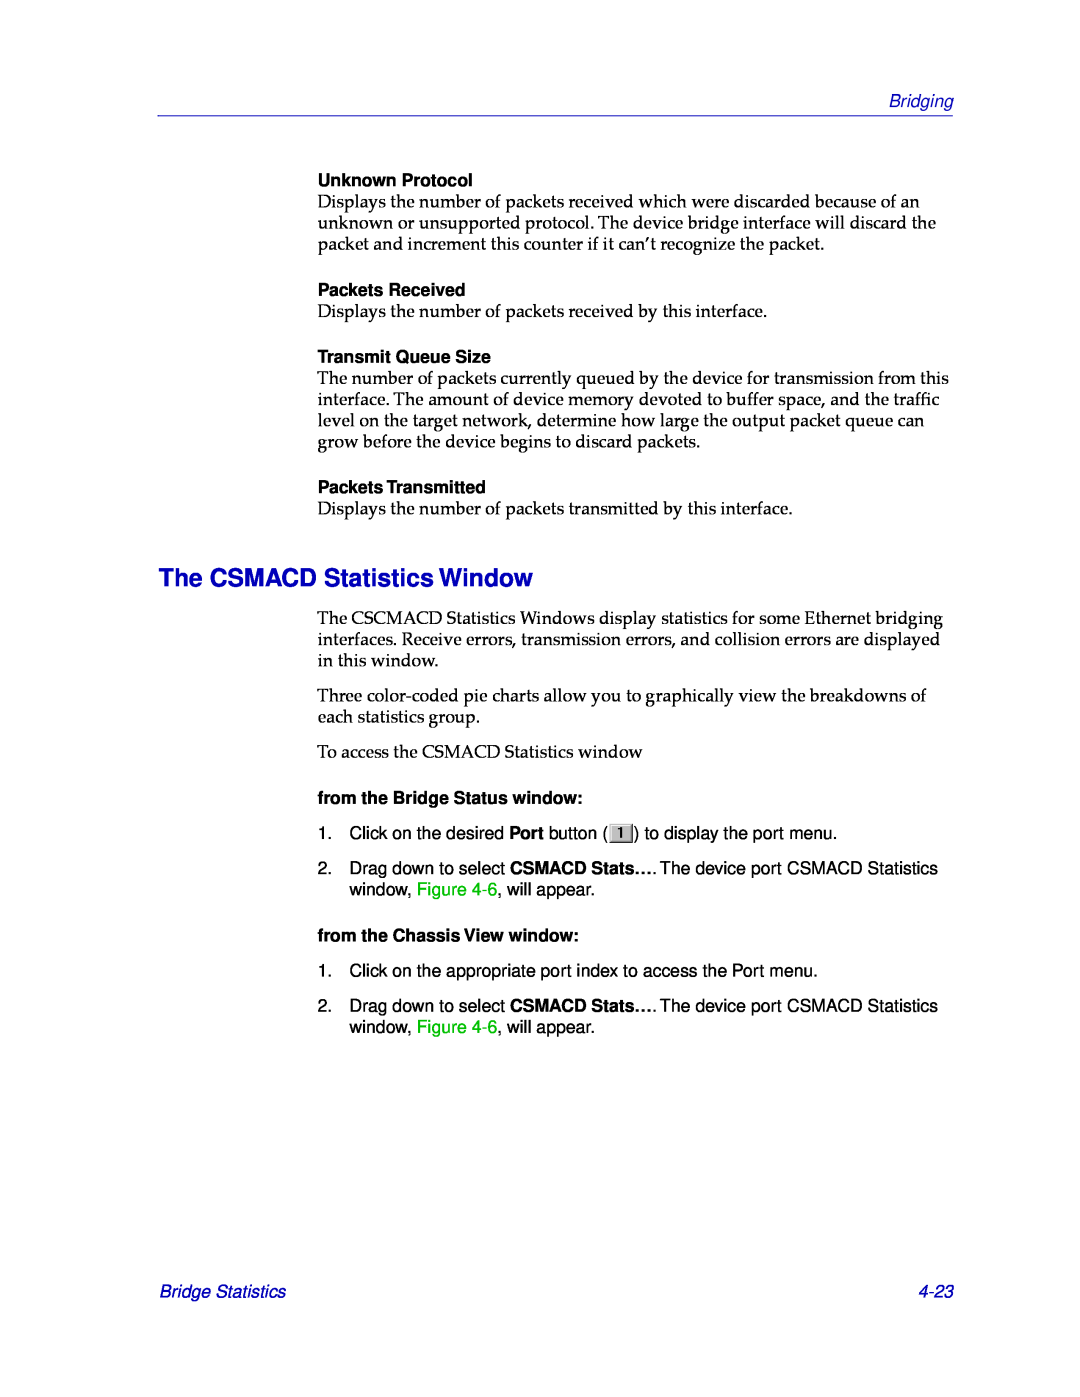 Cabletron Systems CSX200 manual The CSMACD Statistics Window, Unknown Protocol, Packets Received, Transmit Queue Size, 4-23 